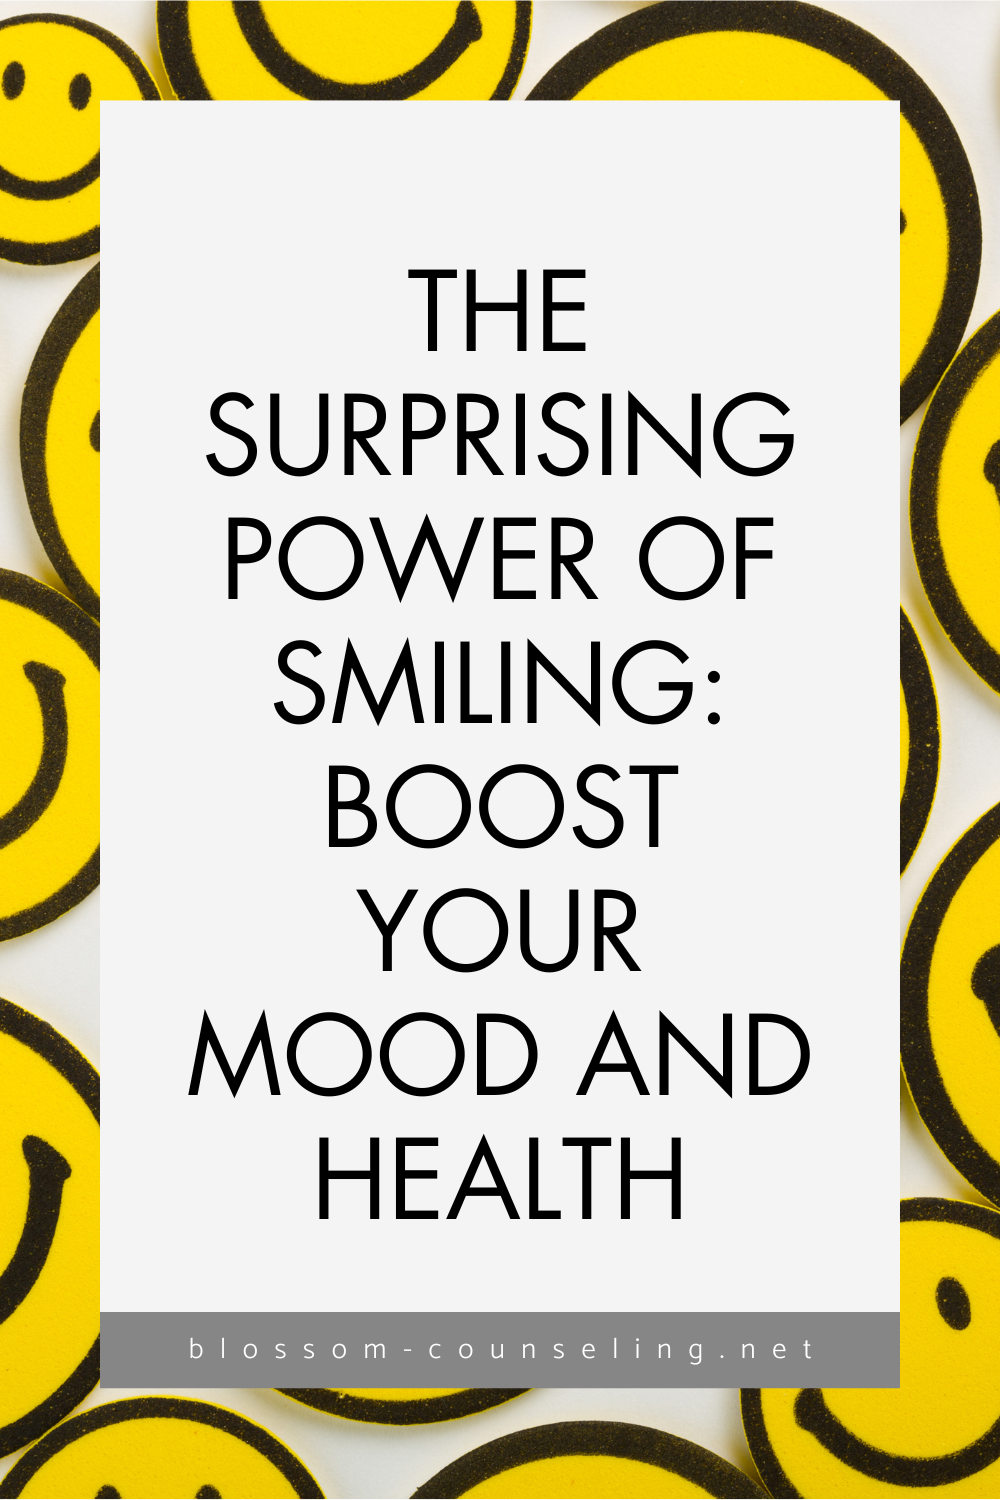 The Surprising Power of Smiling: Boost Your Mood and Health